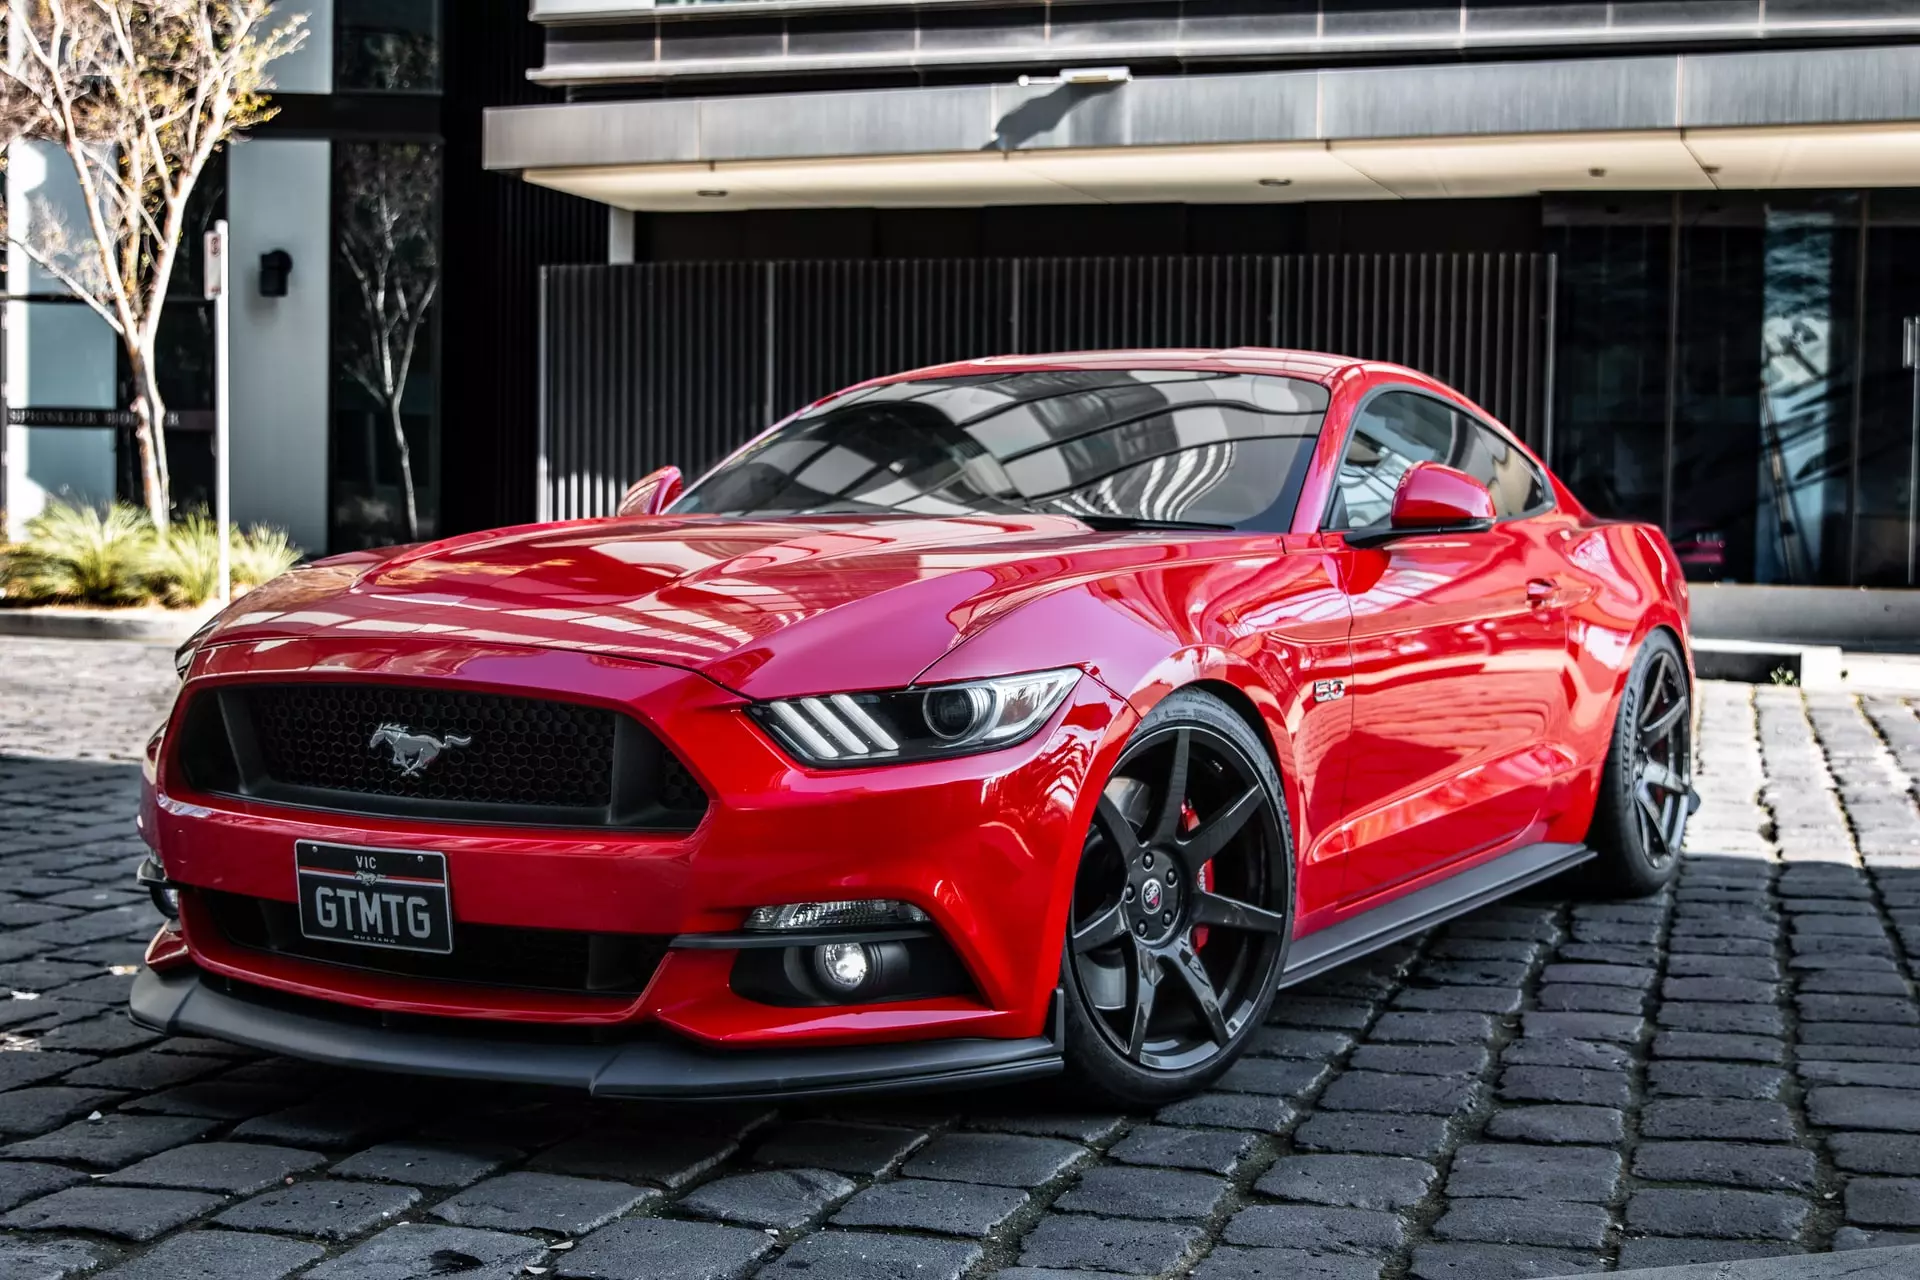 Red Mustang car on the street